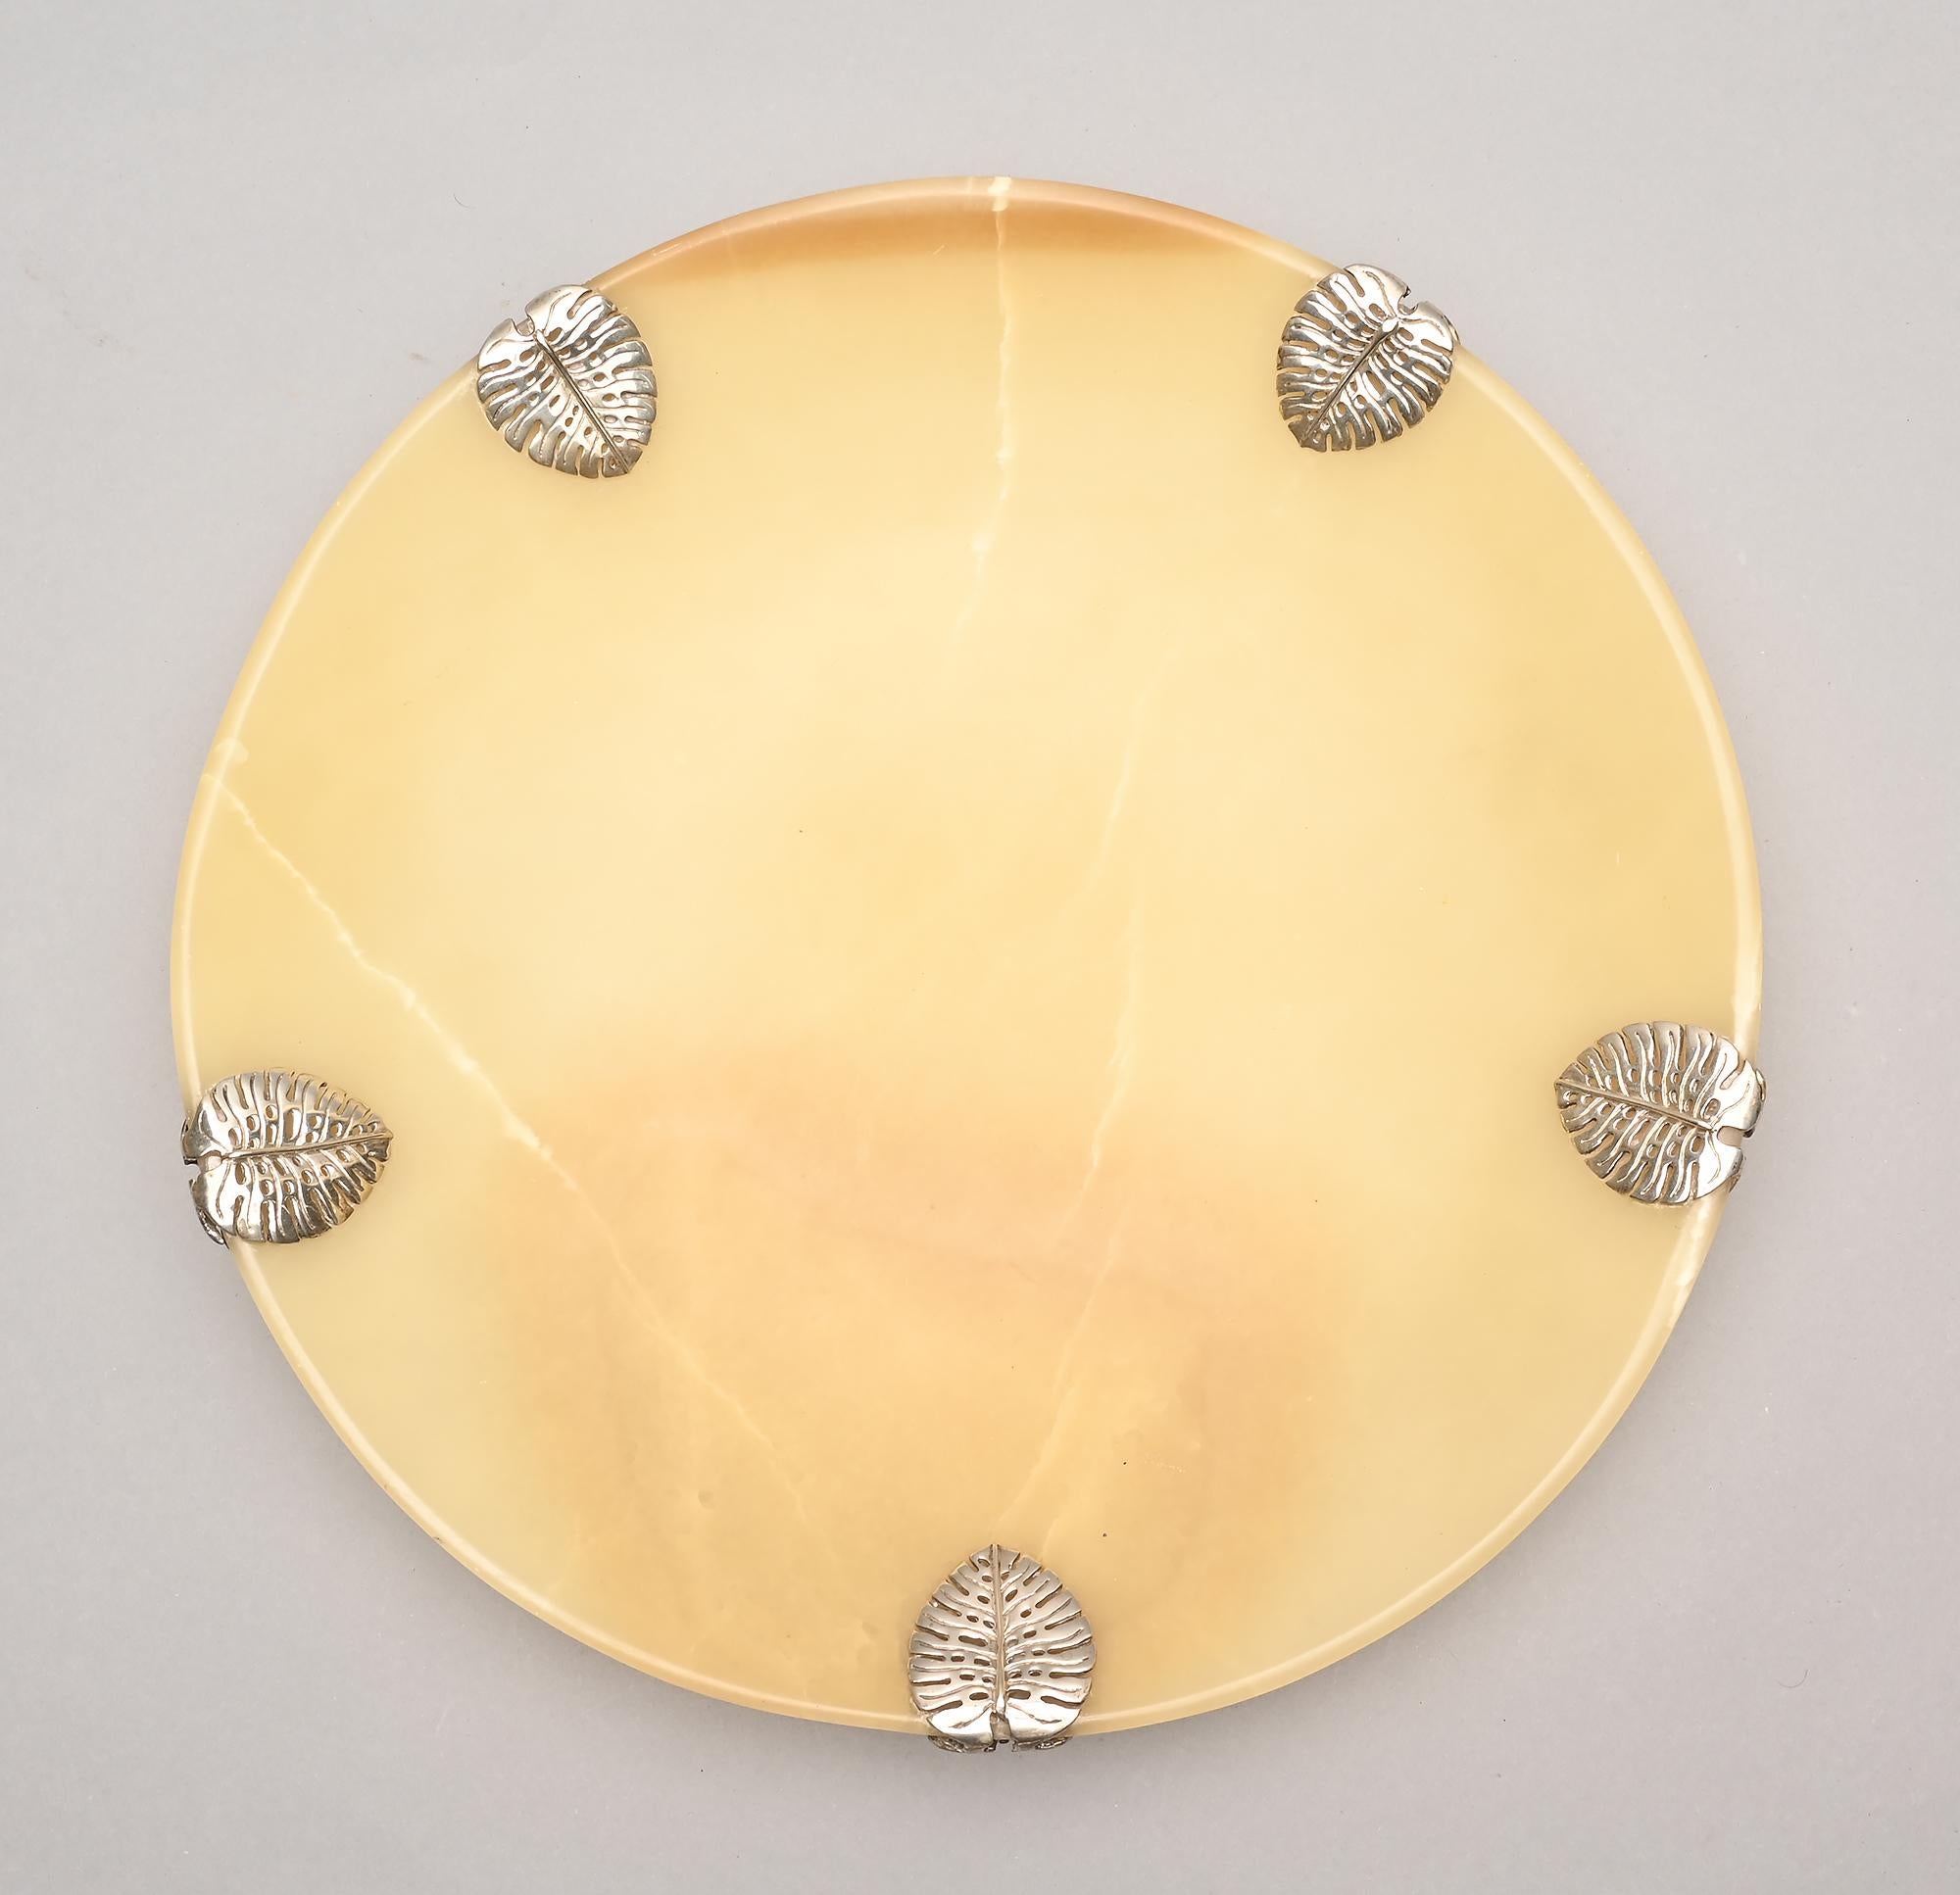 This elegant alabaster bowl with sterling silver ornamentation was made by Emilia Castillo. The bowl measures 14 inches in diameter and features five leaves, that I believe are philodendron, which are folded over the rim. Irregularities in the color